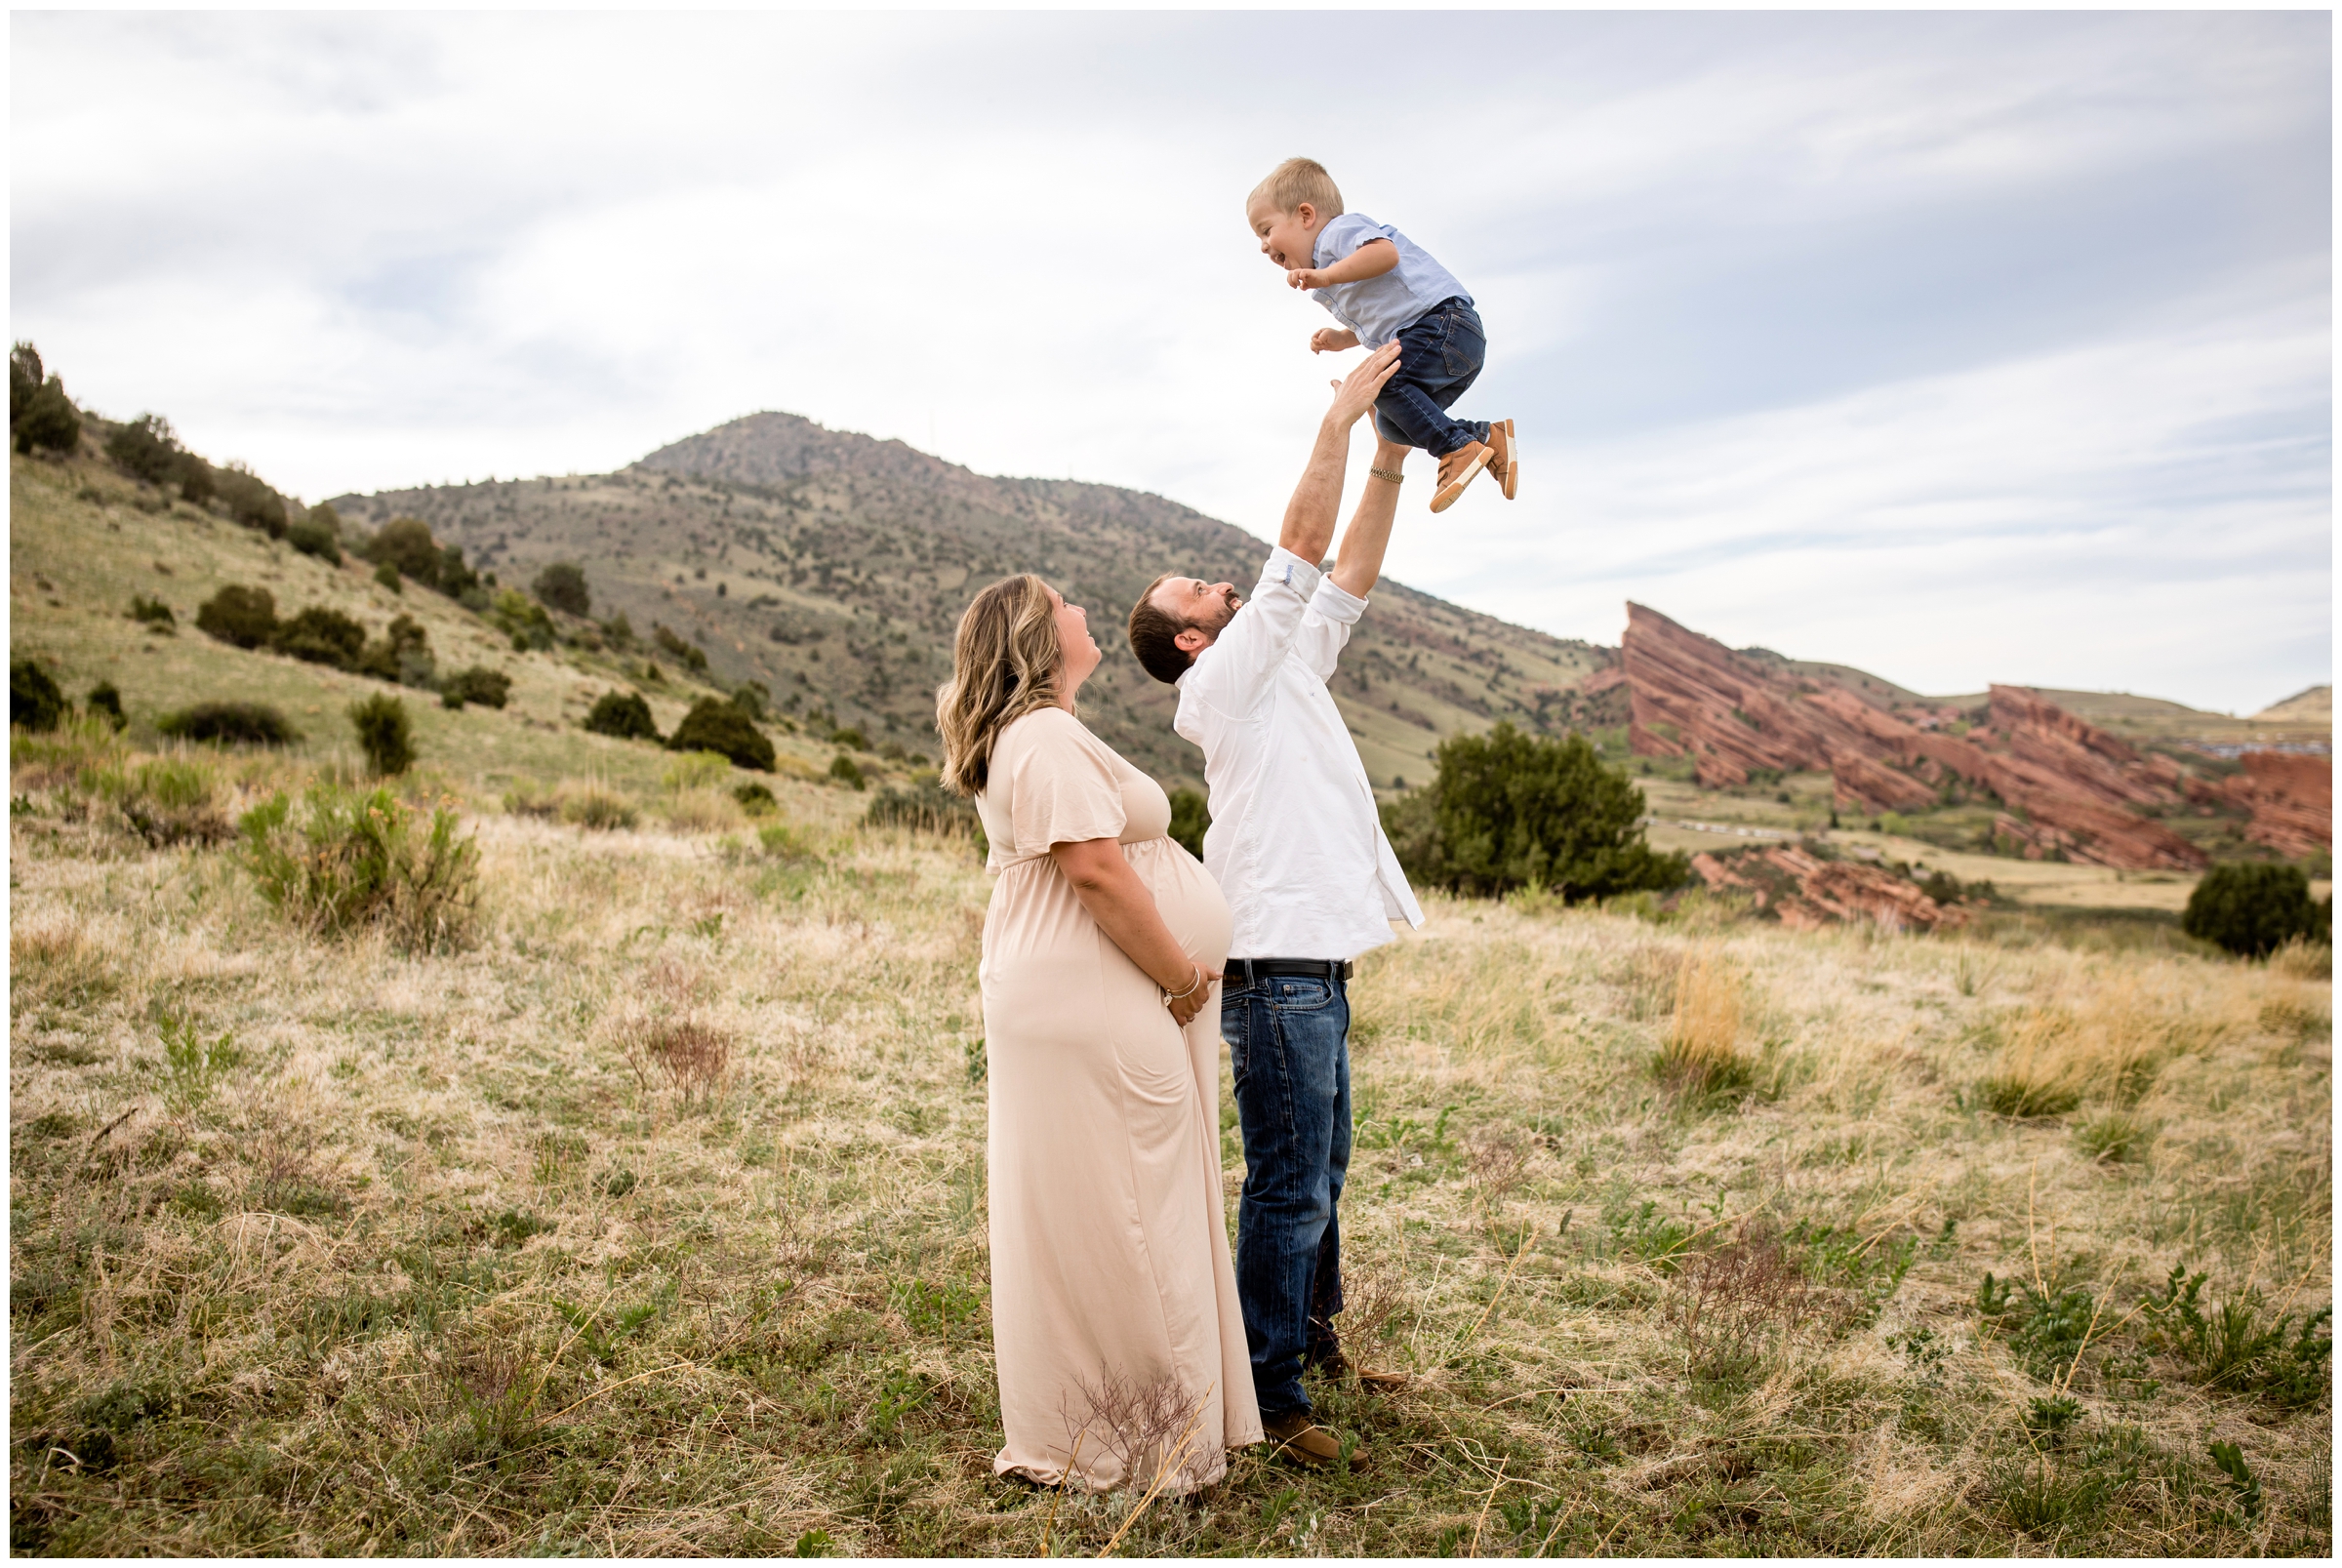 dad lifting son in the air during candid family photography session in Colorado foothills